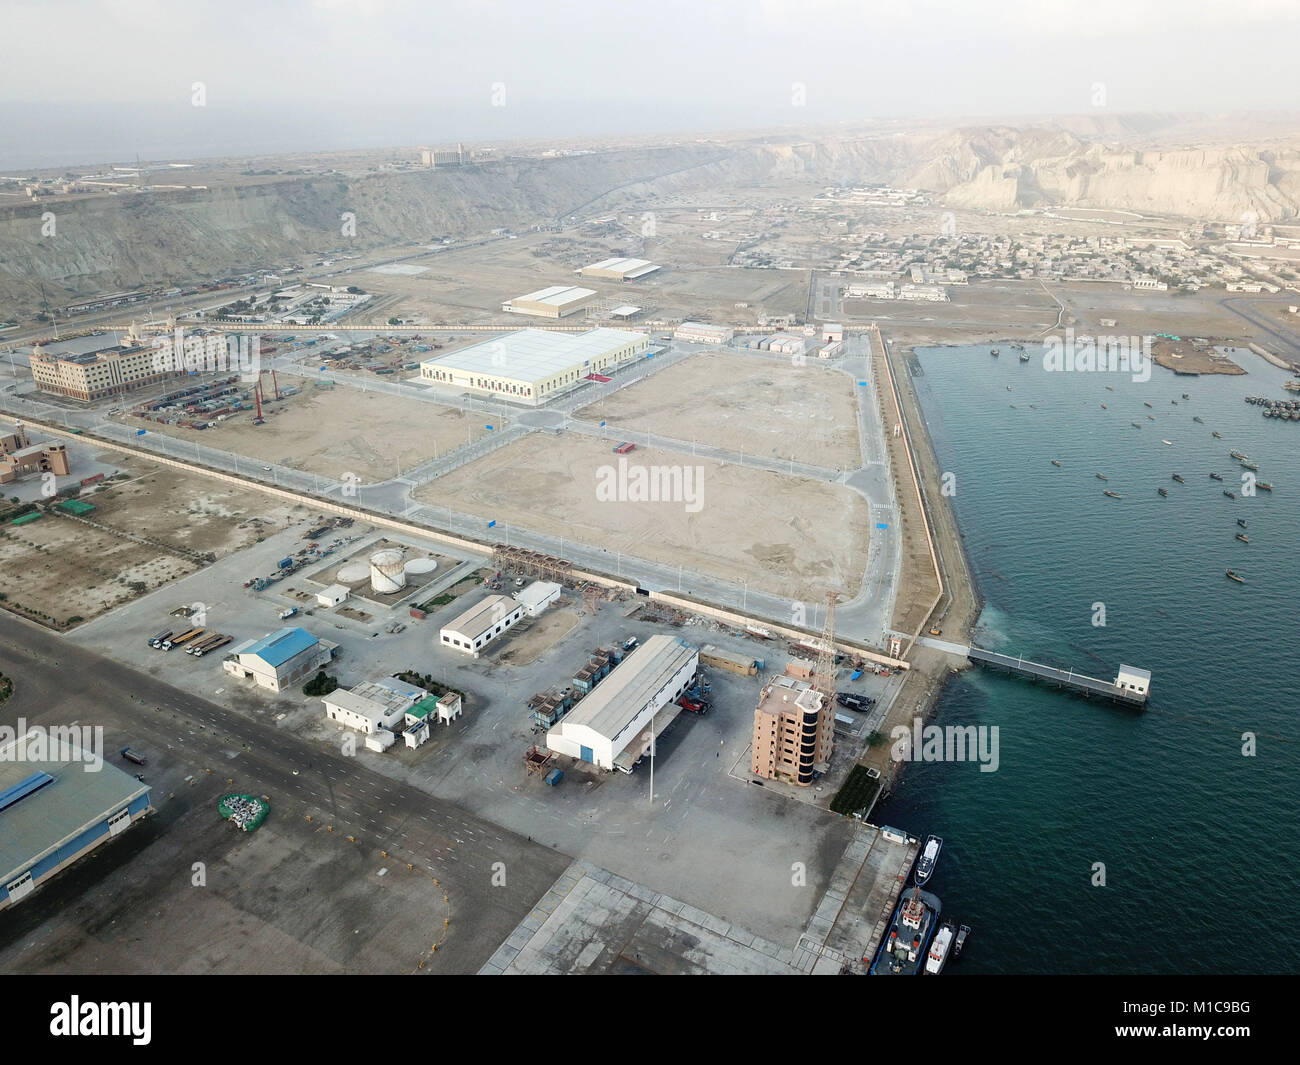 (180129) -- GWADAR, Jan. 29, 2018 (Xinhua) -- Photo taken on Jan. 29, 2018 shows a view of Gwadar free zone in southwest Pakistan's Gwadar. The first phase of Gwadar Port's Free Zone in southwestern Pakistan was inaugurated on Monday by Prime Minister Shahid Khaqan Abbasi, who commented that the free zone would help facilitate regional and global trade under the China-Pakistan Economic Corridor (CPEC). (Xinhua/Ahmad Kamal) (psw) Stock Photo